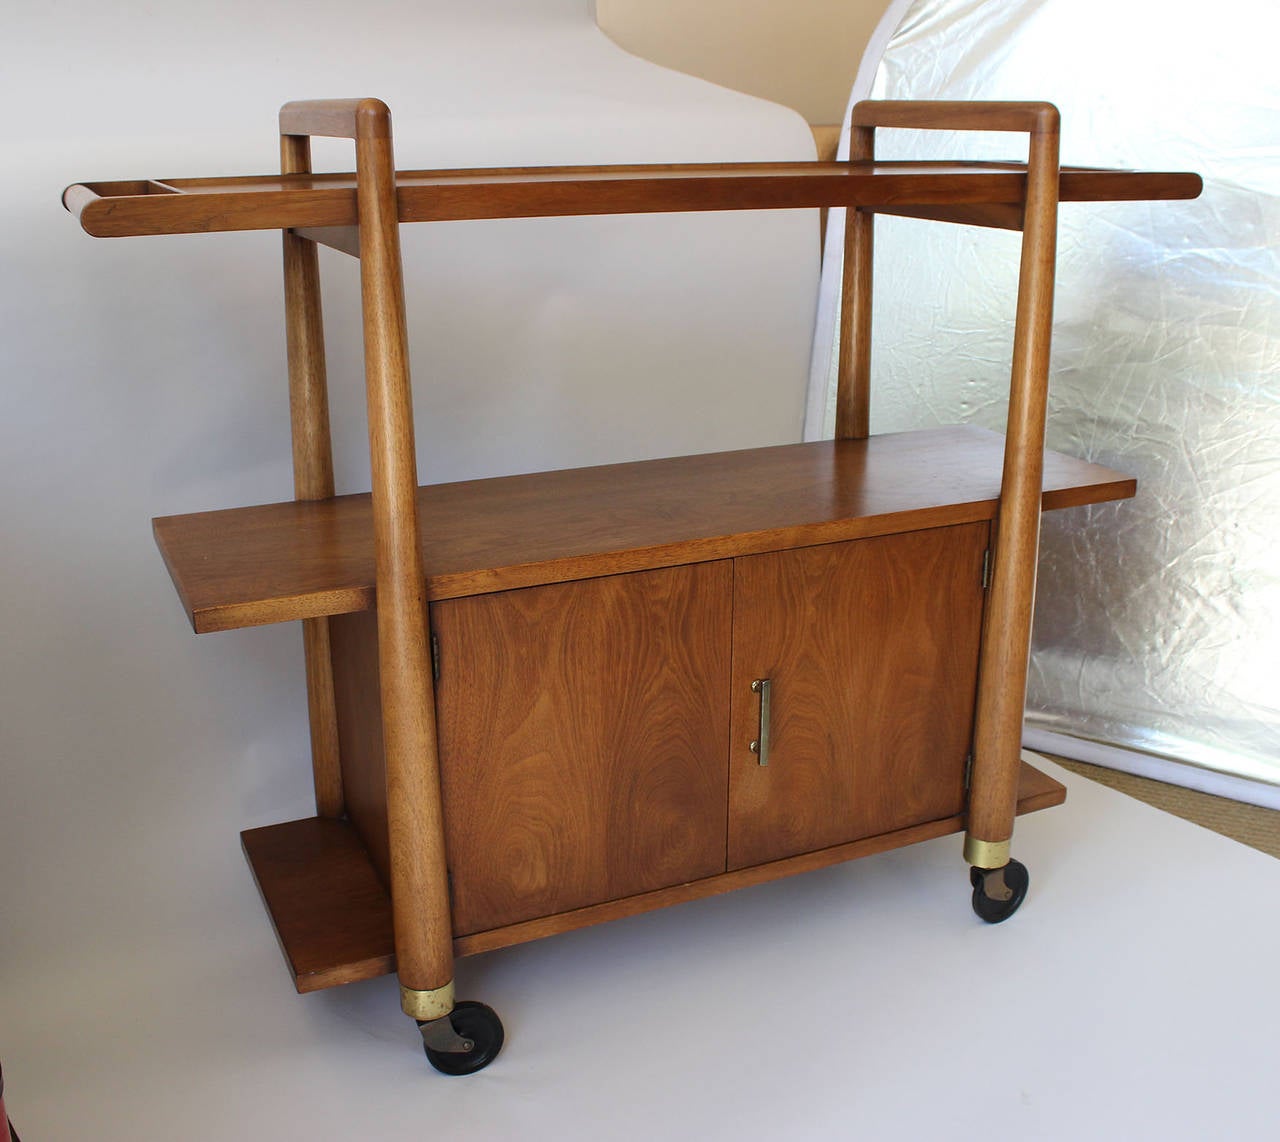 A very solid and functional rolling server cart, which can also serve as a console with patinaed brass hardware, by T.H. Robsjohn-Gibbings.

complementary delivery within 30 miles.